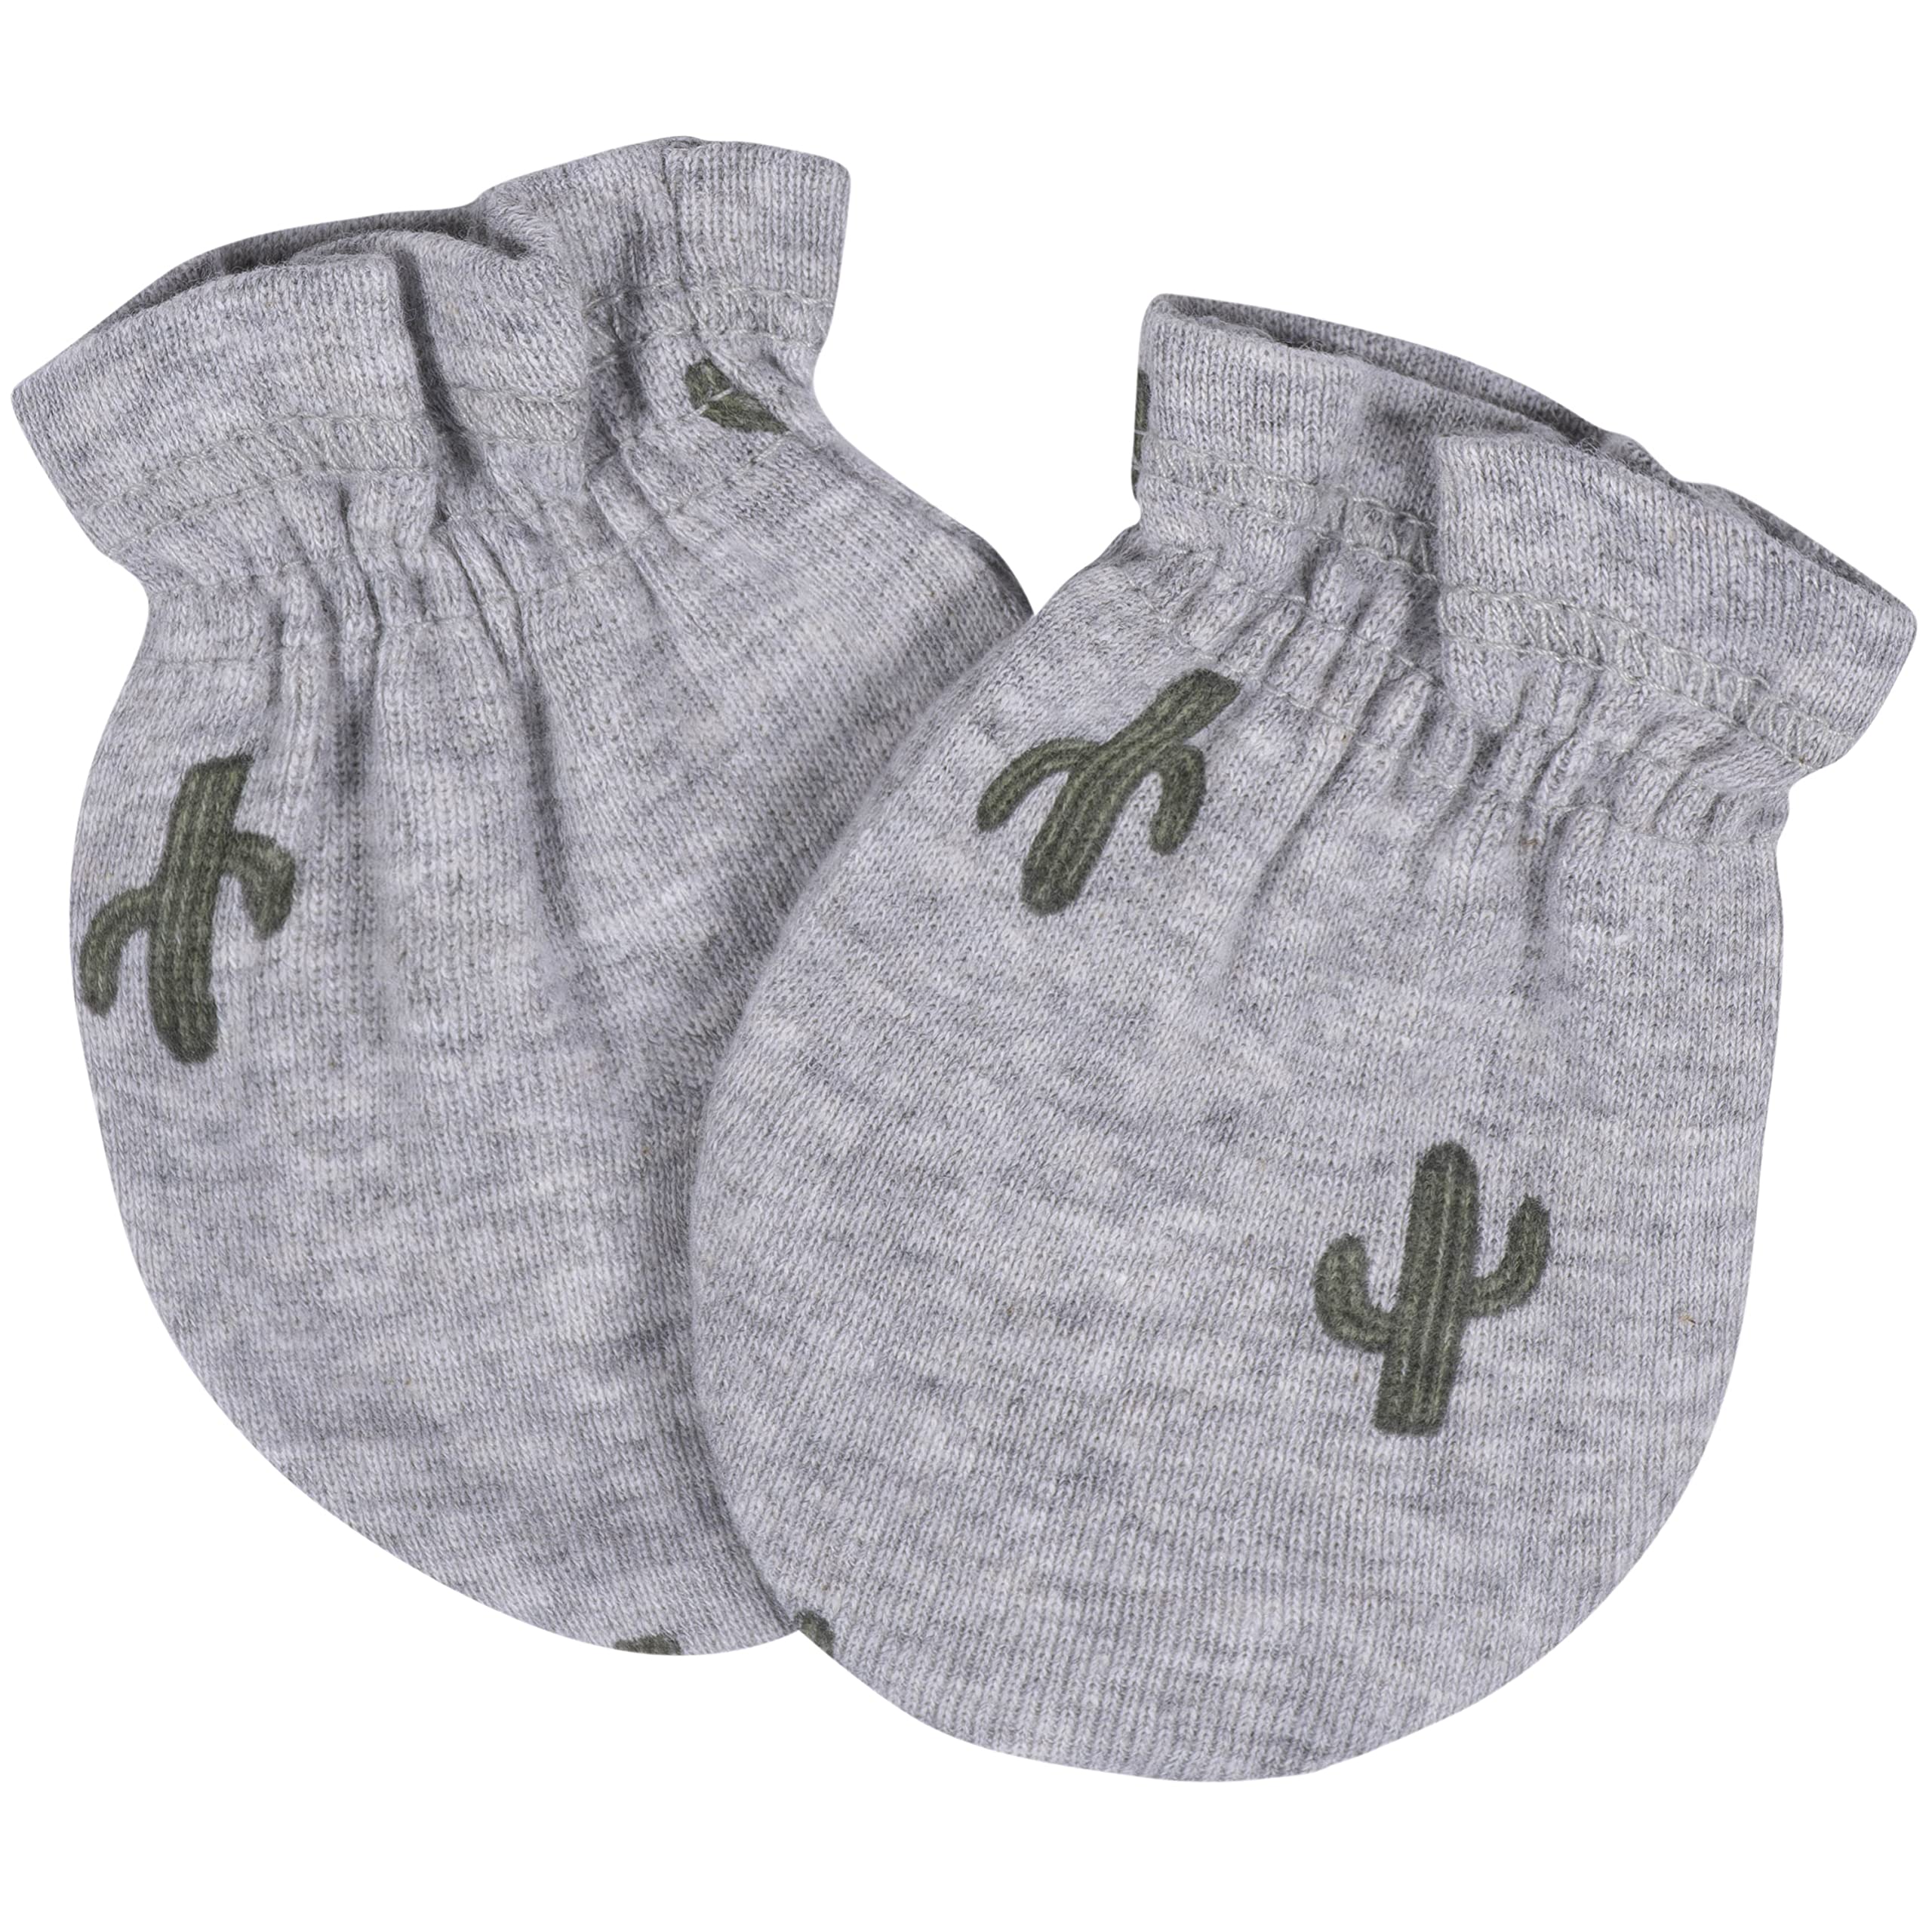 Gerber Unisex Baby 8-Piece and 9-Piece Cap and Mitten Sets